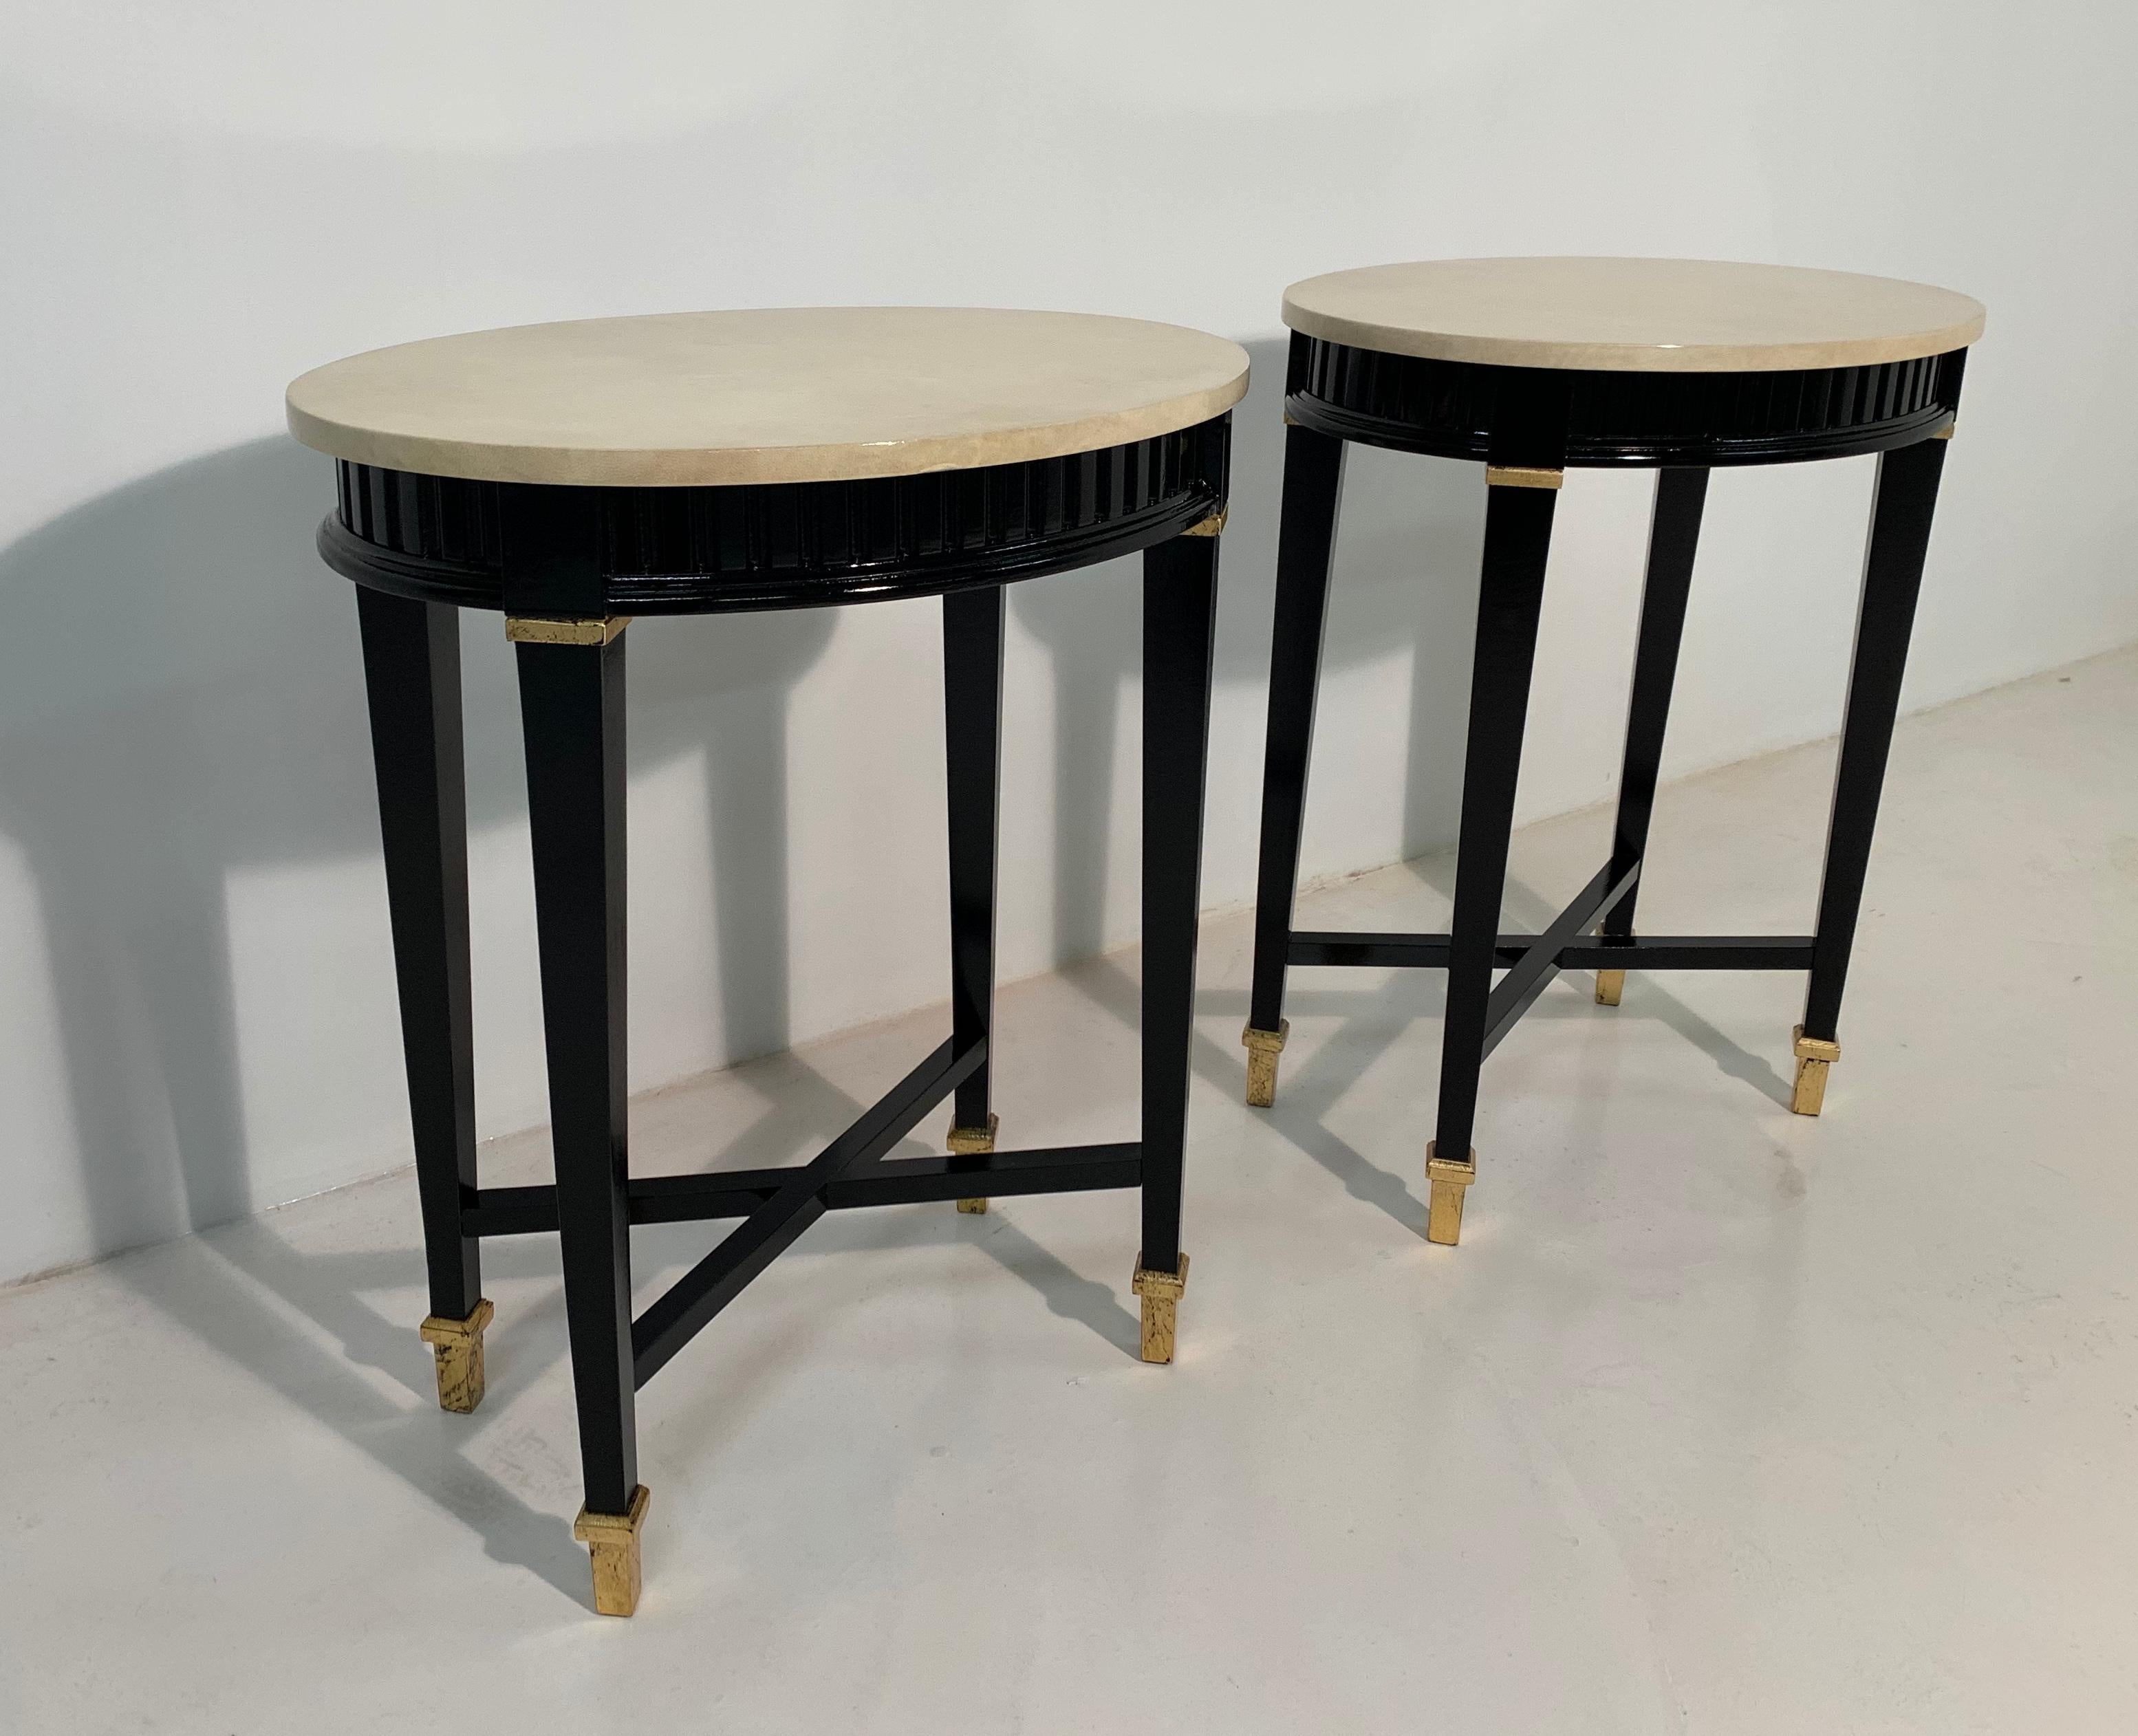 20th Century Pair of Italian Art Deco Parchment Side Table